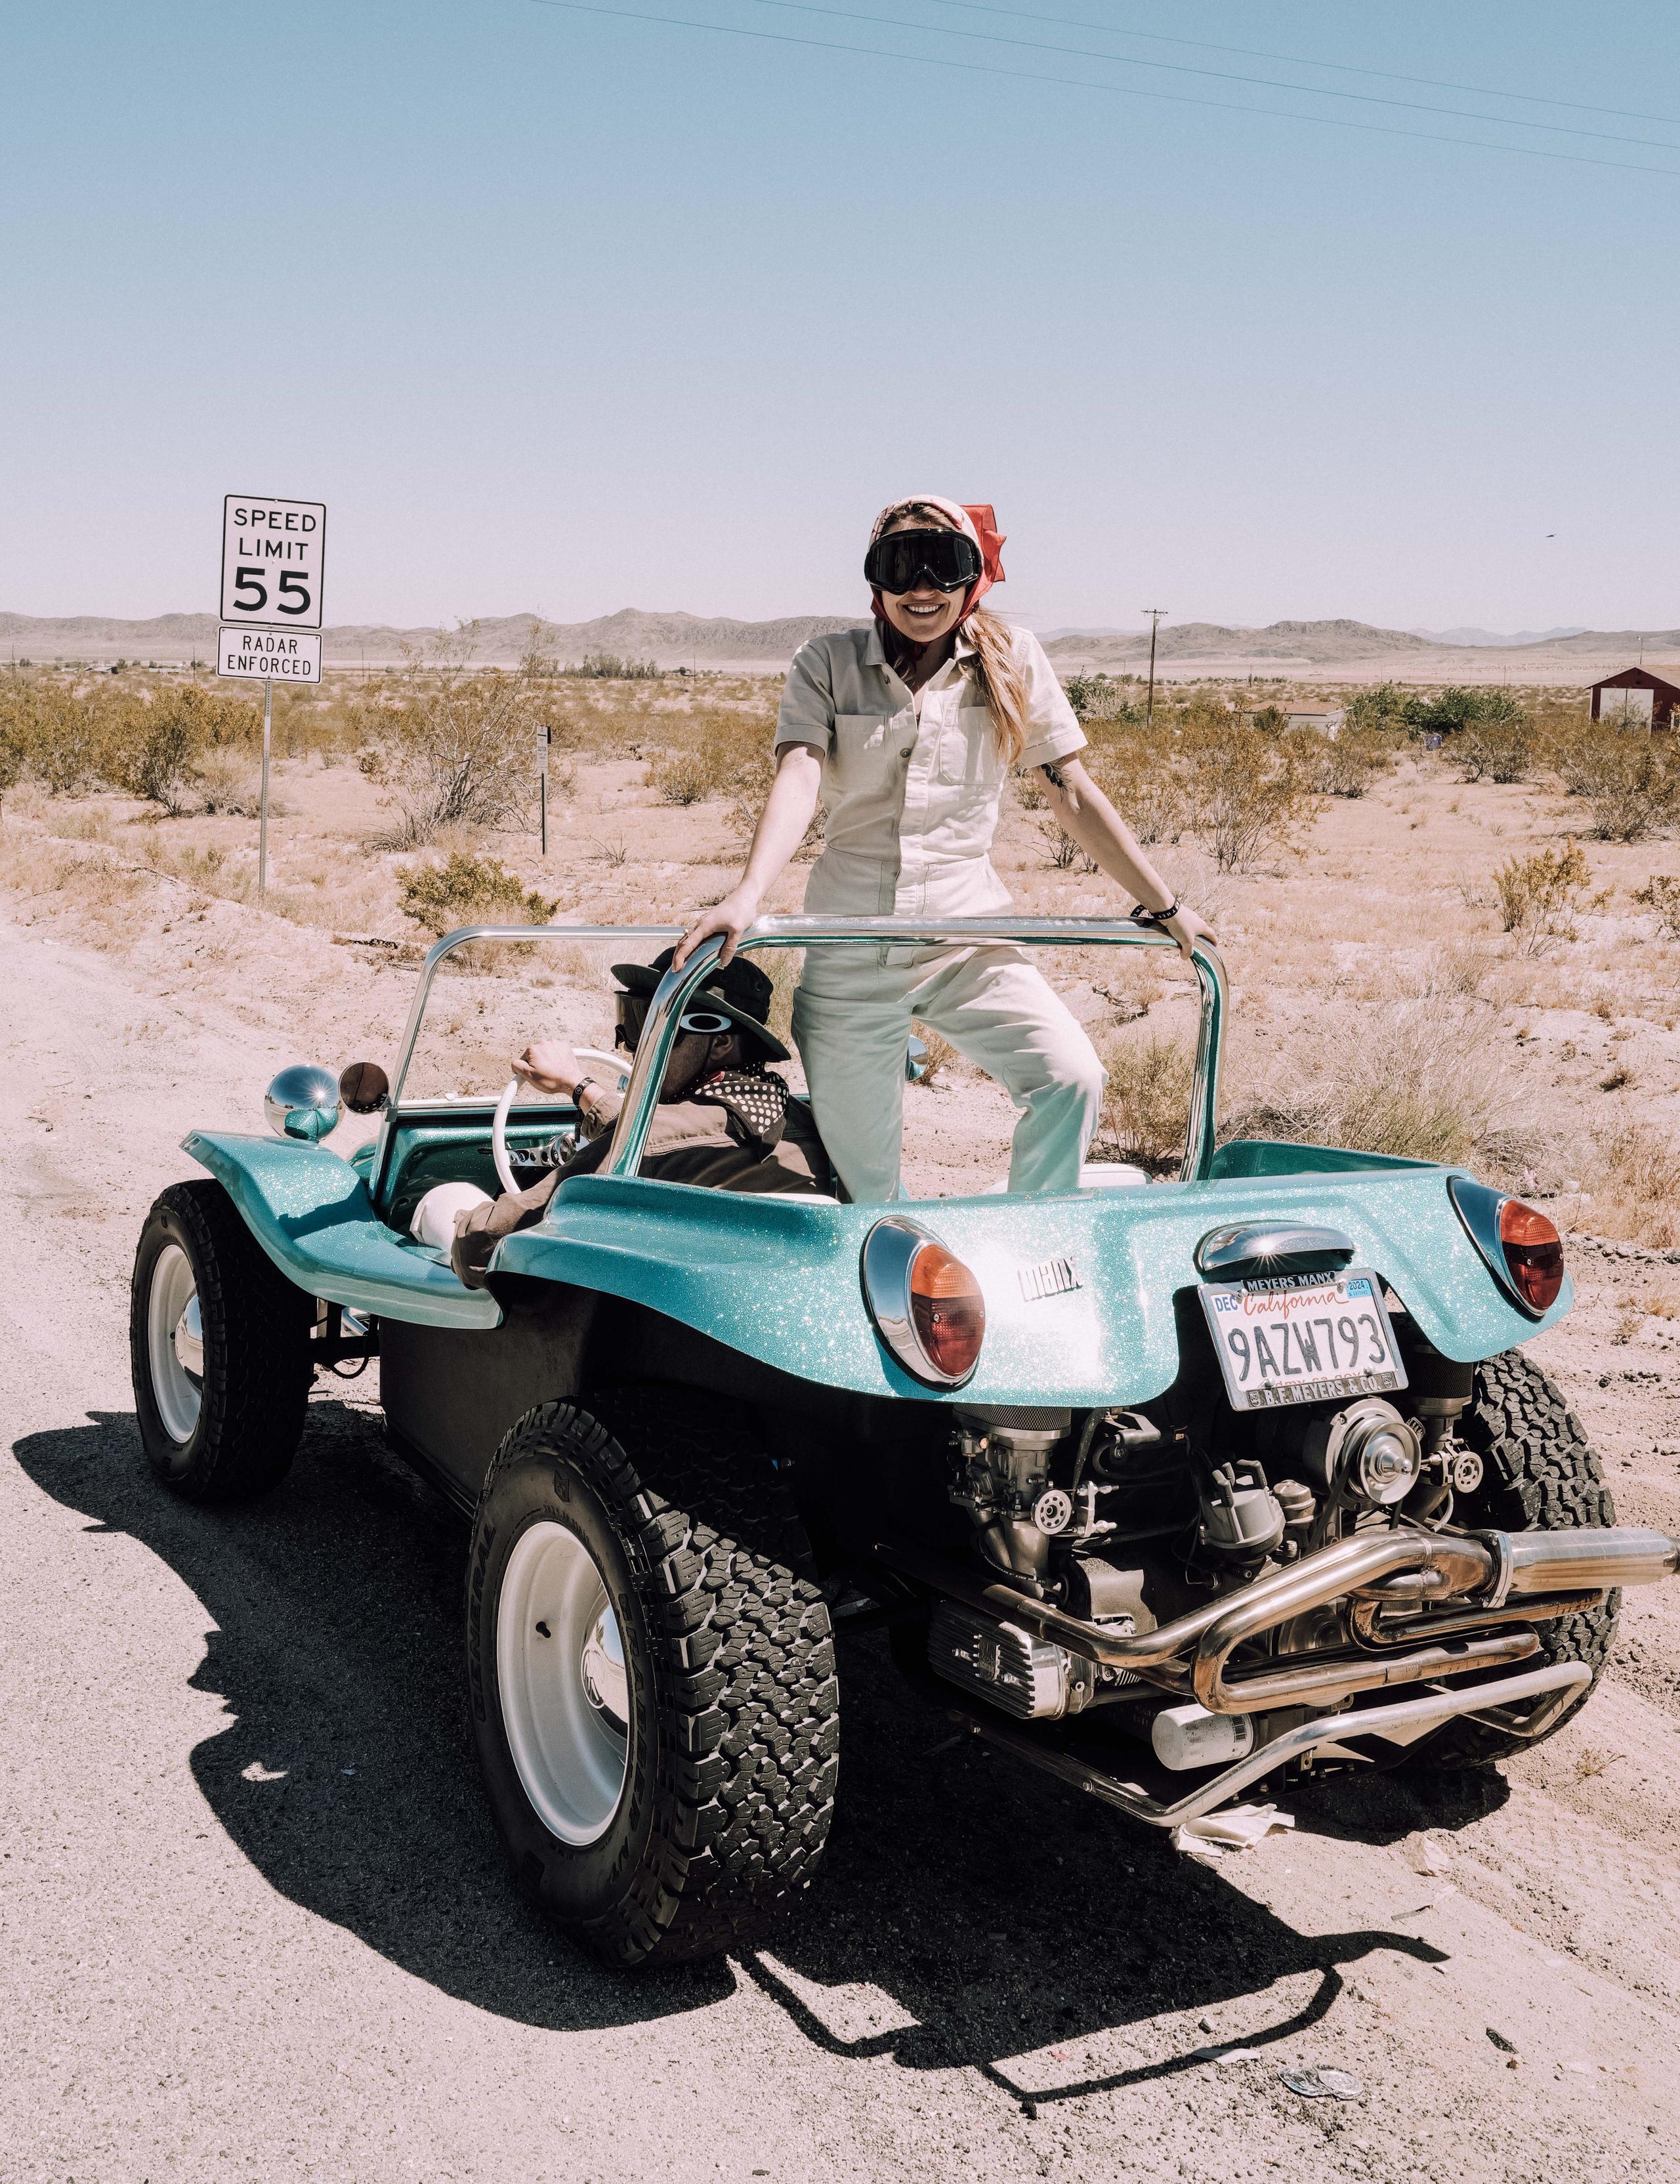 Woman standing on the back of a custom vehicle on a dirt road in Joshua Tree, California